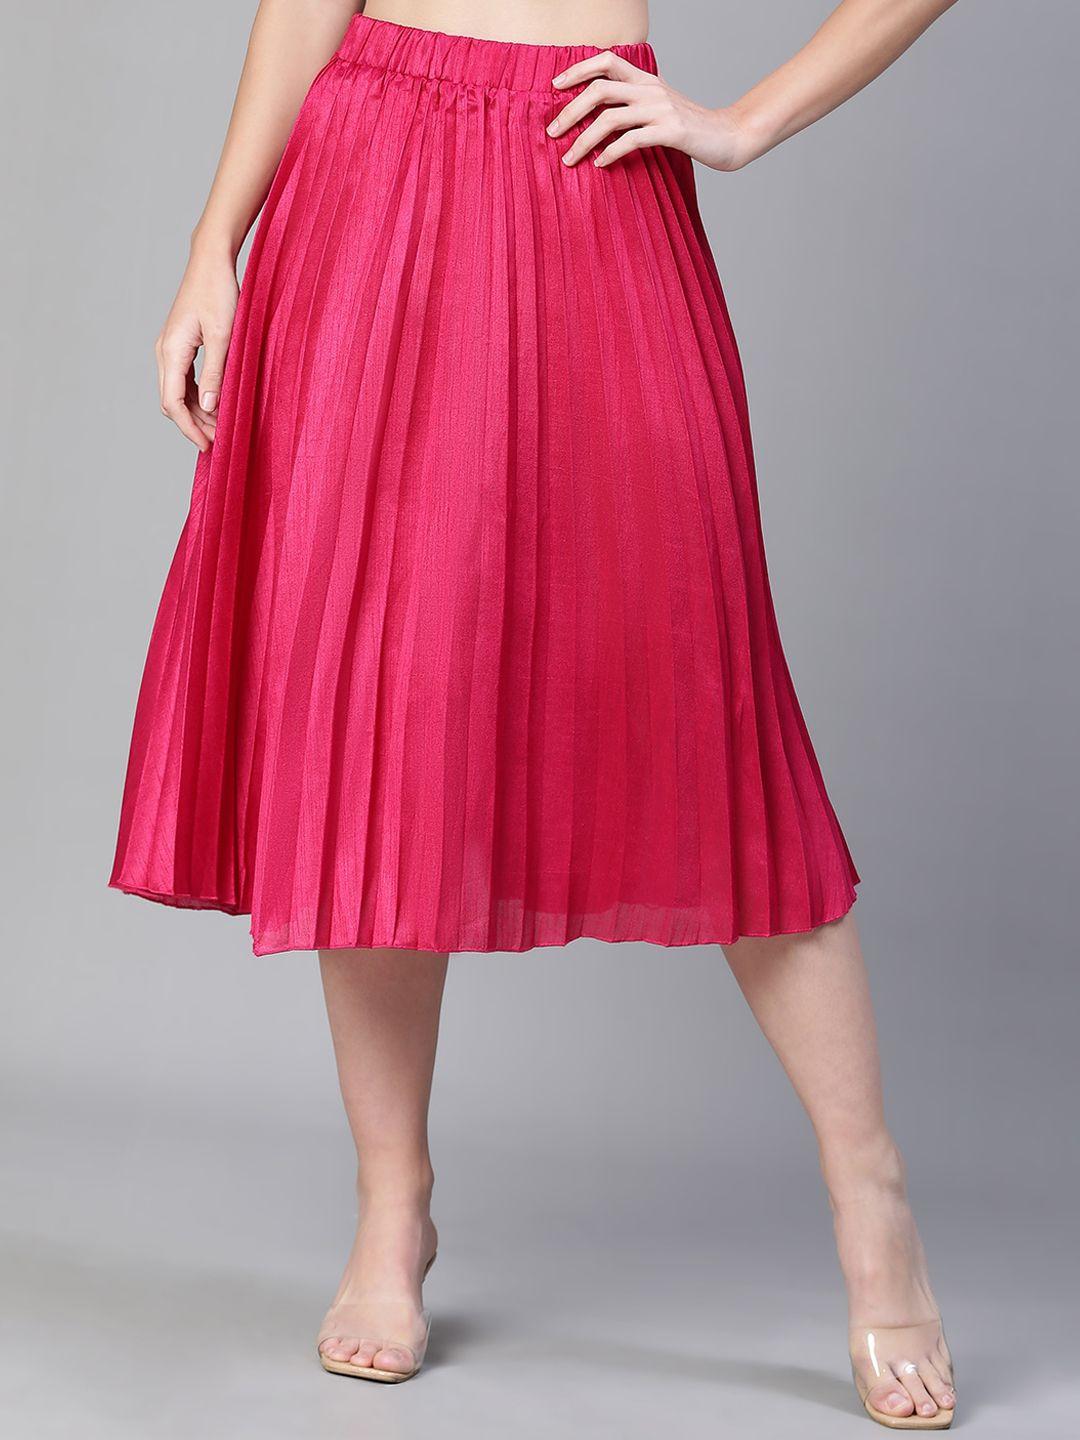 oxolloxo accordion pleated flared skirt